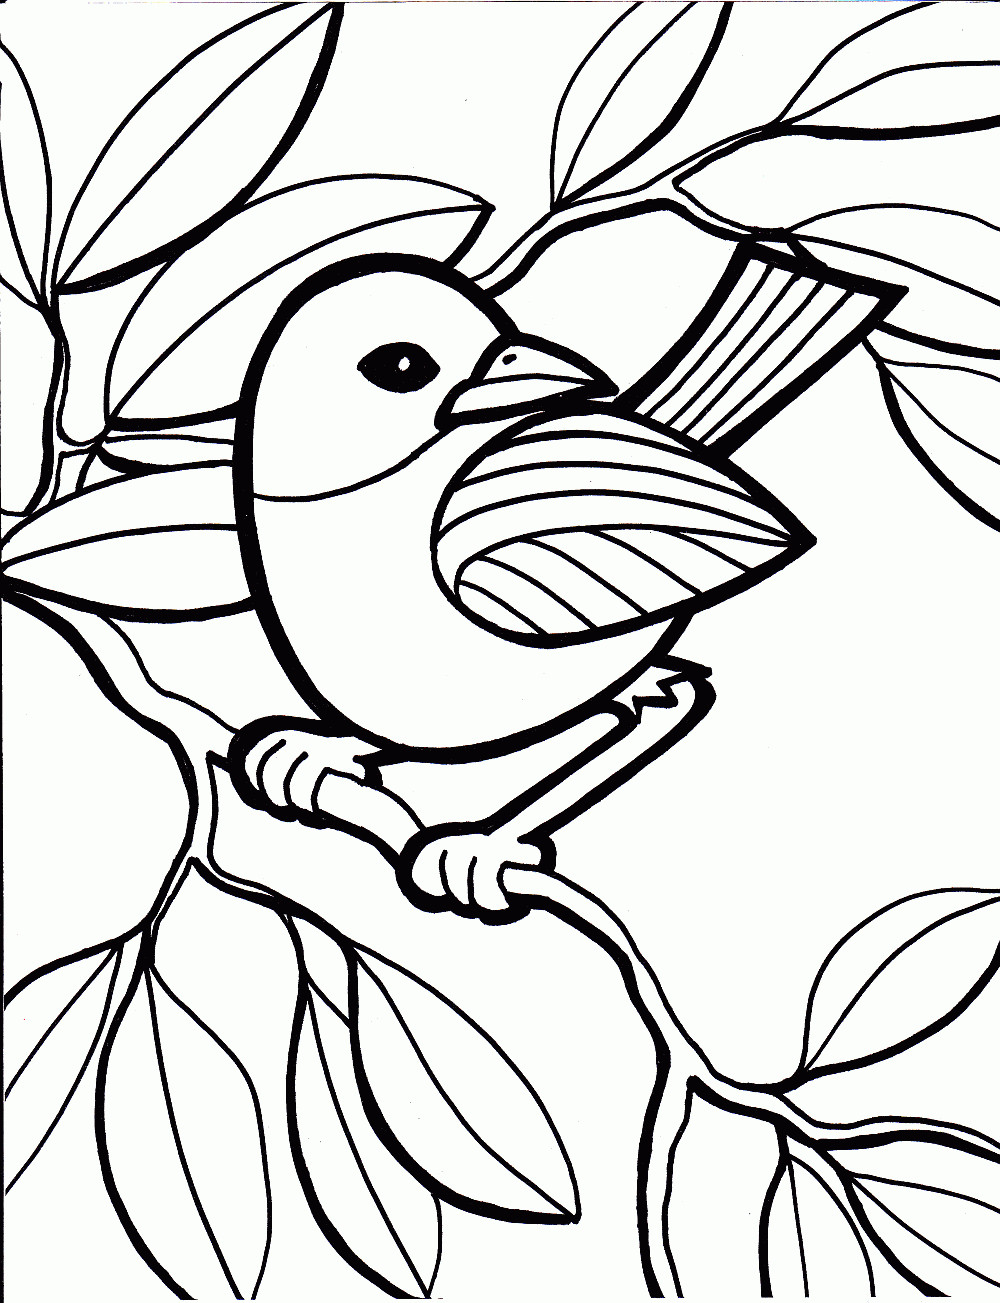 Printable Coloring Pages For Kids
 Coloring Now Blog Archive Kids Coloring Pages Printable